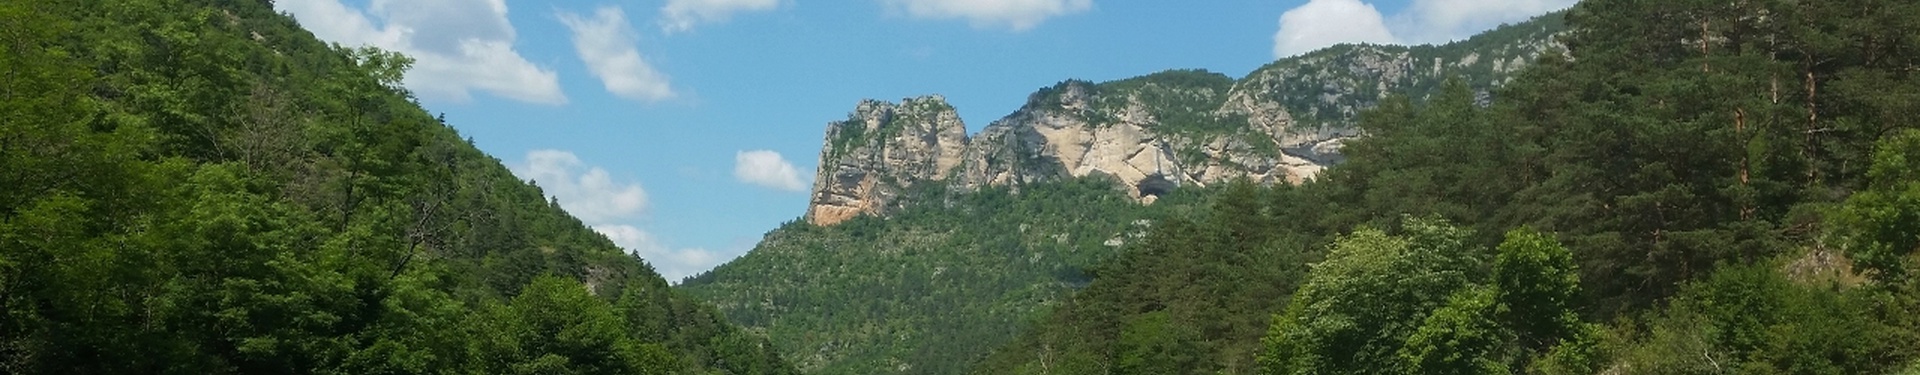 Self guided walking tours in the Cévennes & Gorges du Tarn, Hiking trips